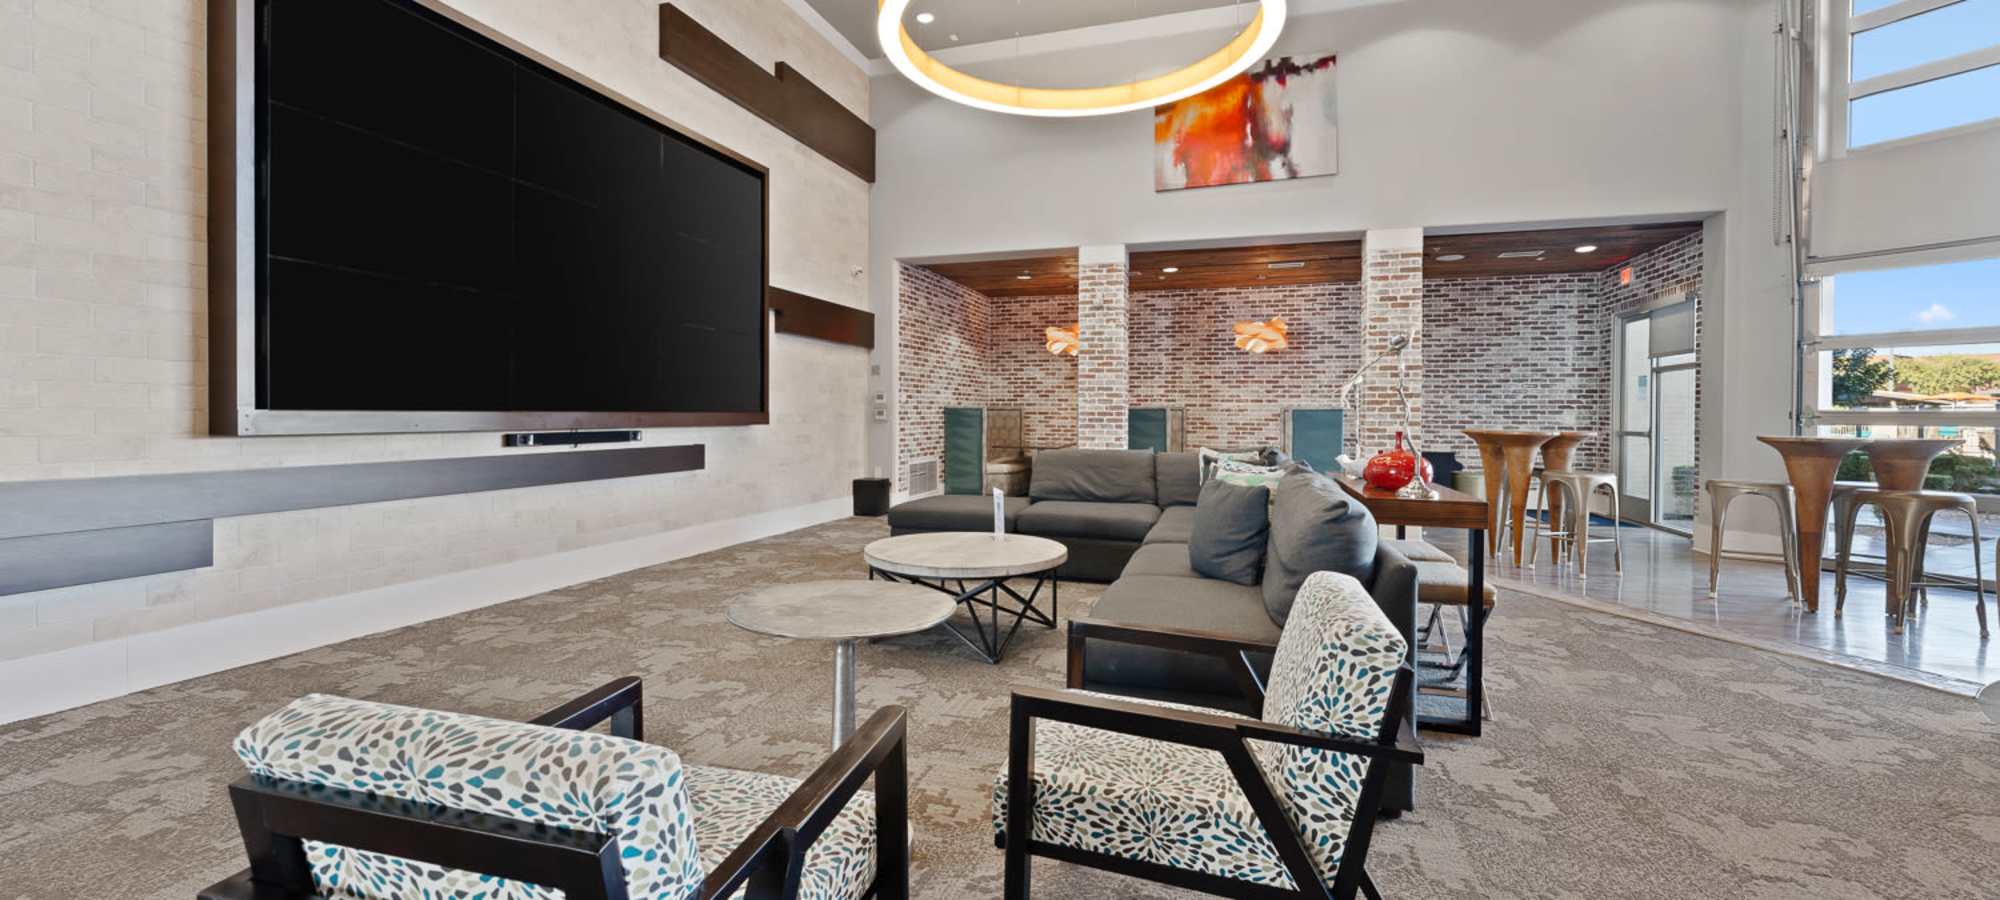 Comfortable seating in front of the large flatscreen TVs in the clubhouse at The Hyve in Tempe, Arizona